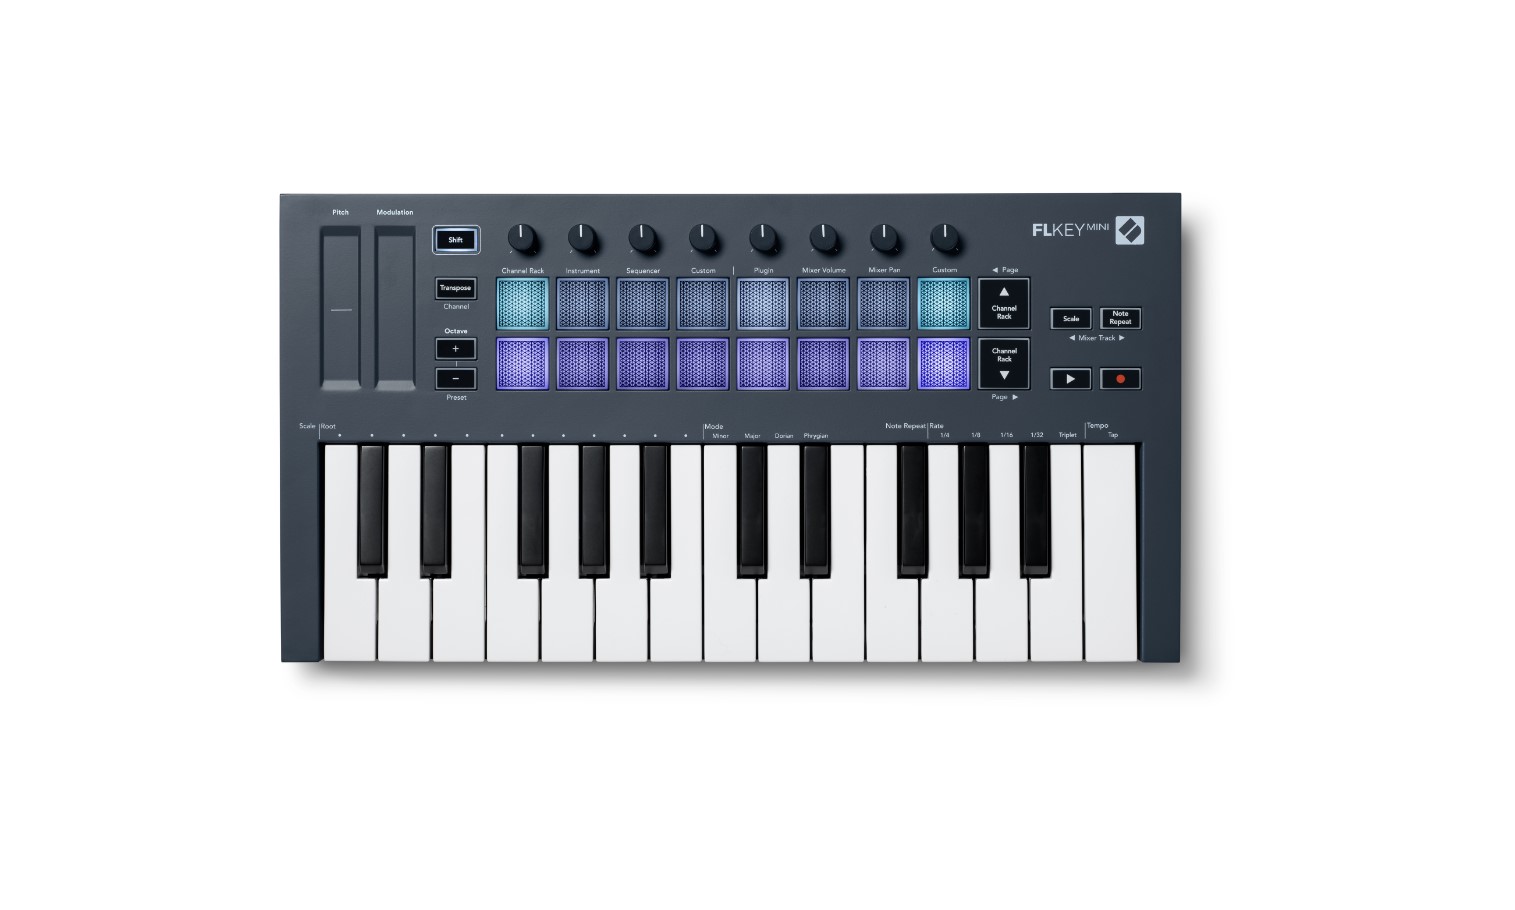 How To Set Up A MIDI Keyboard